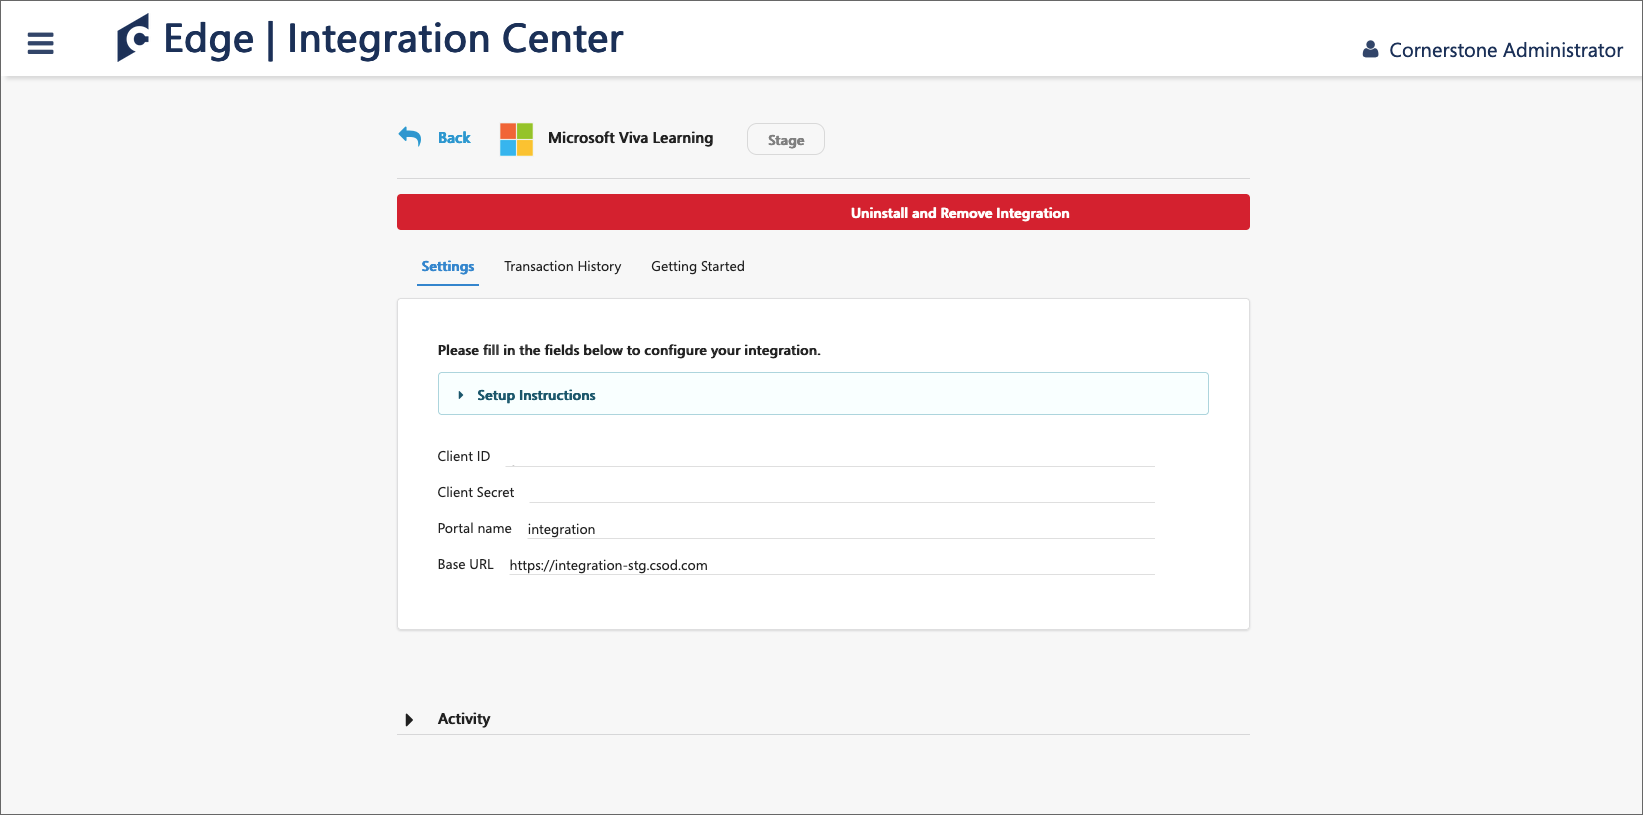 Screenshot of the configuration screen where you can find your Client ID, Client Secret, Portal name, and Base URL.